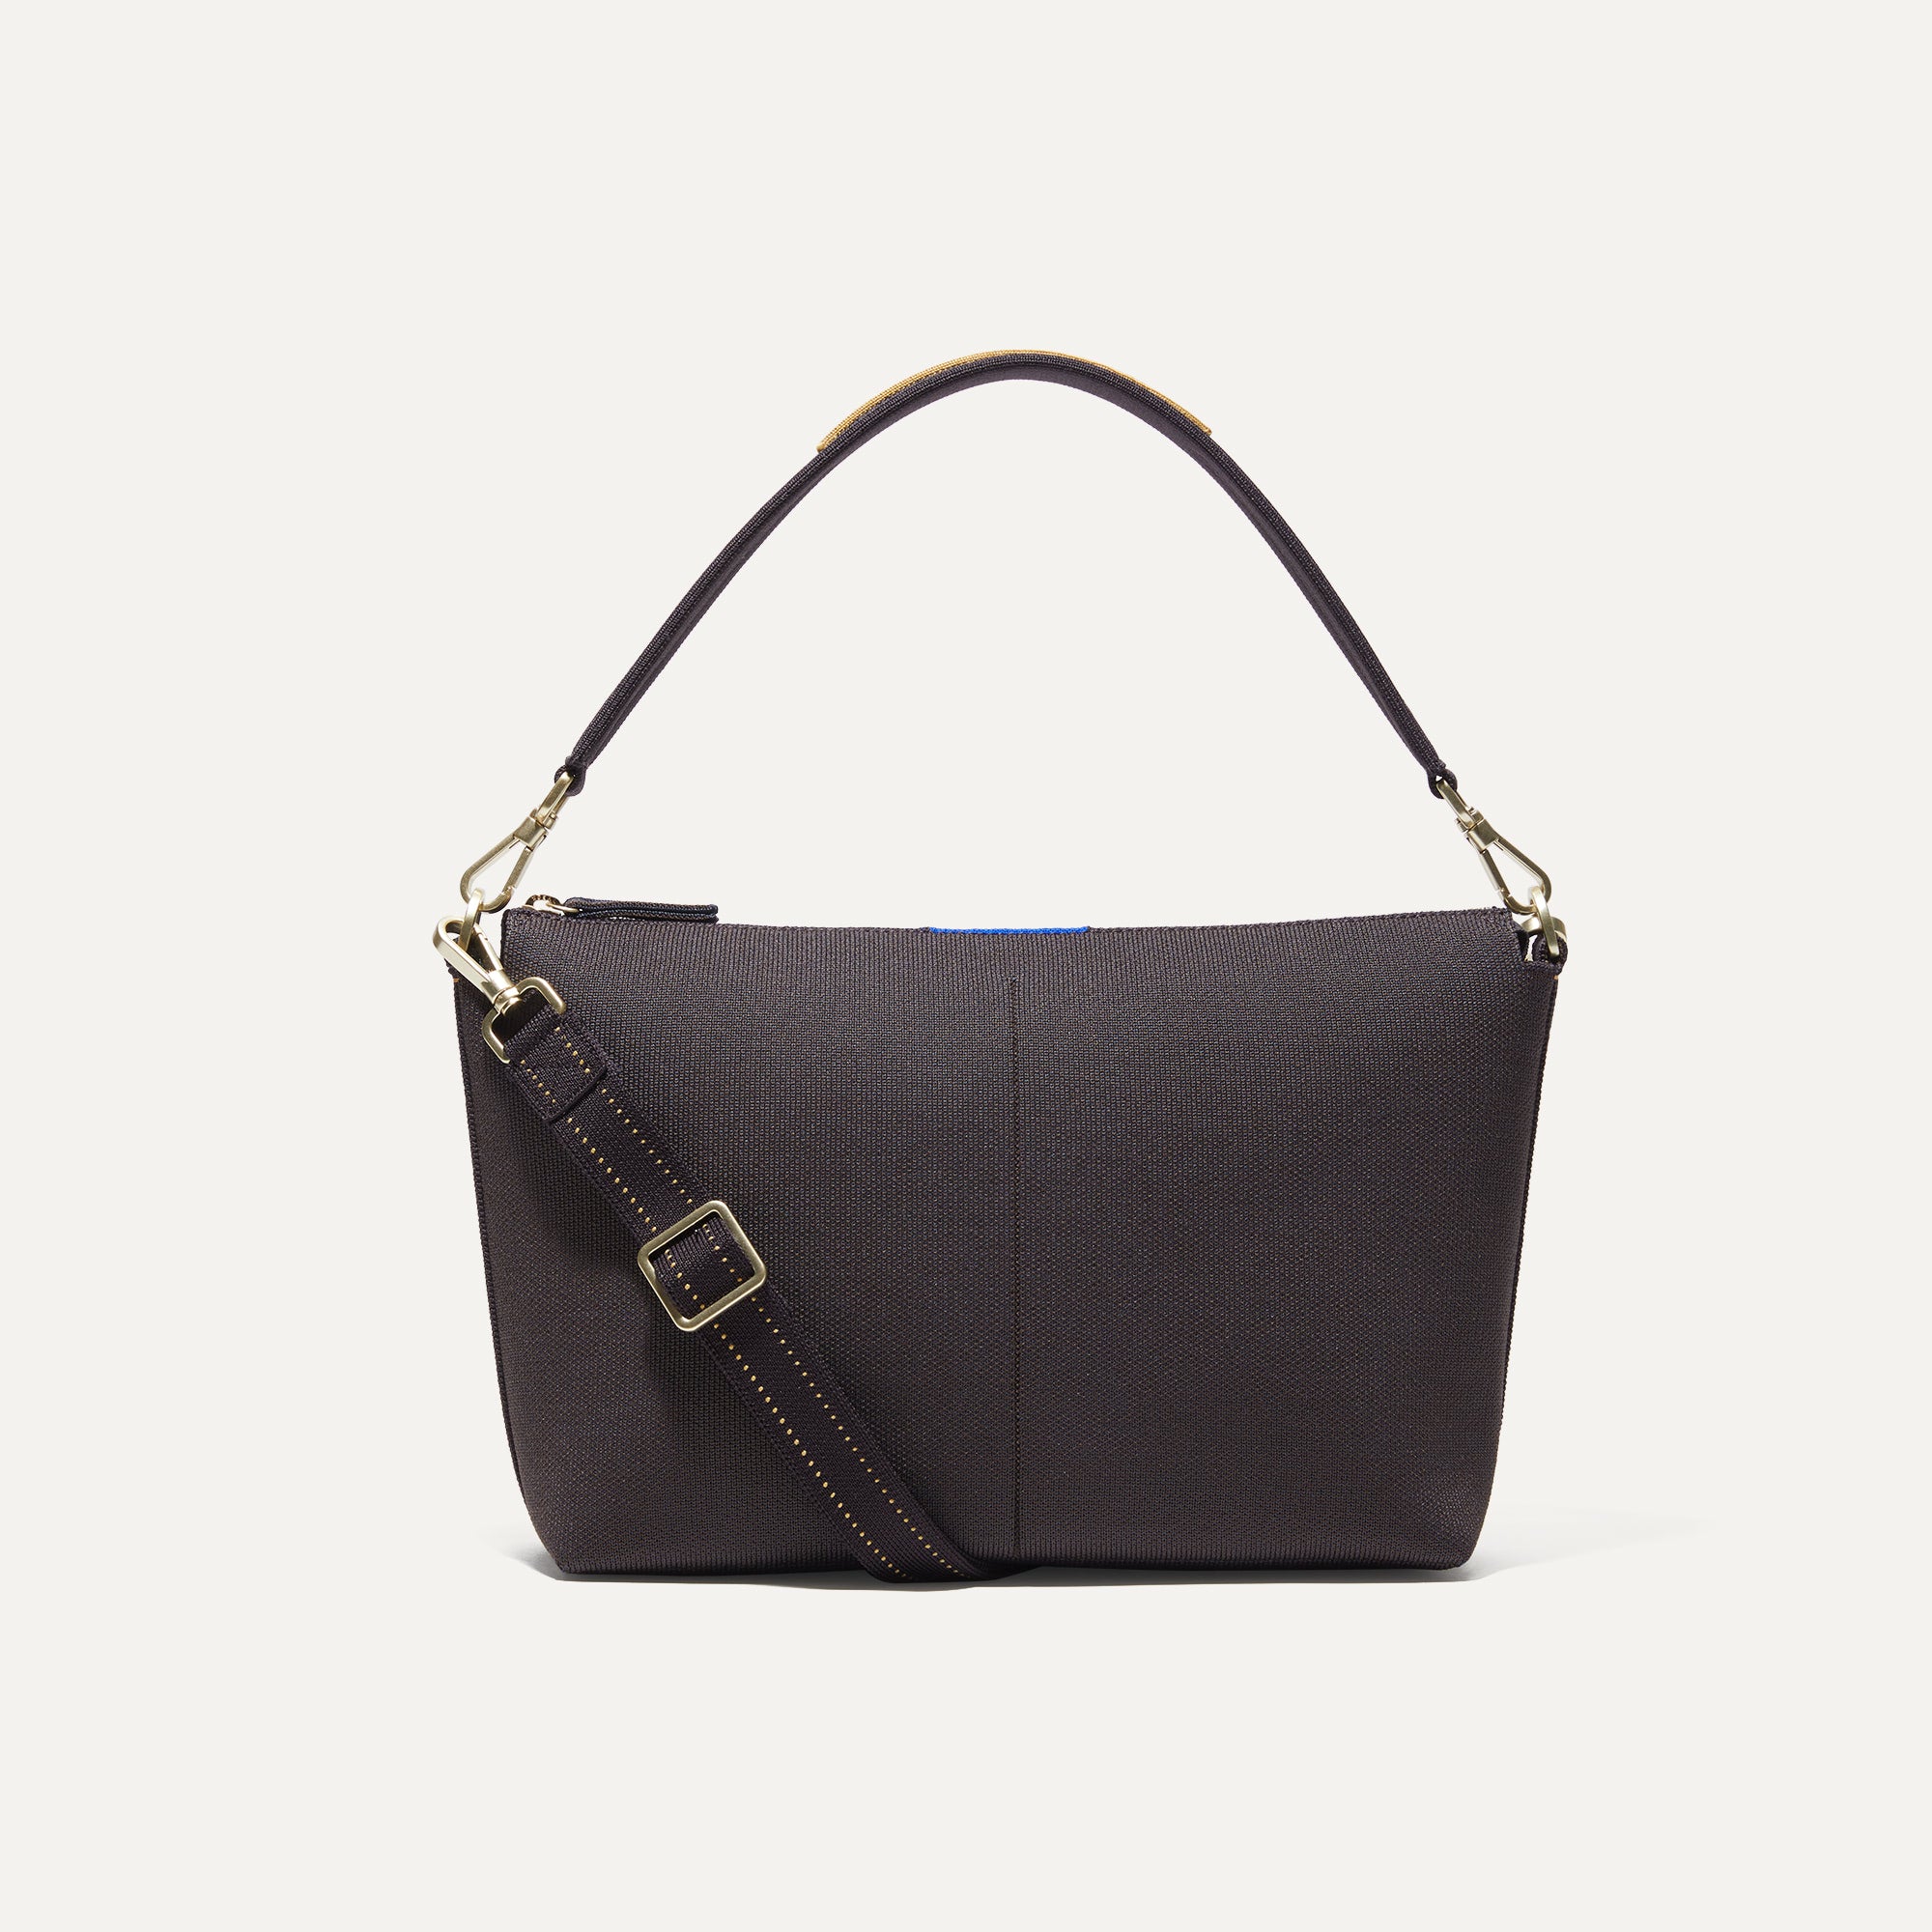 Rothy's - The Daily Crossbody in Black/Grey/Neutral